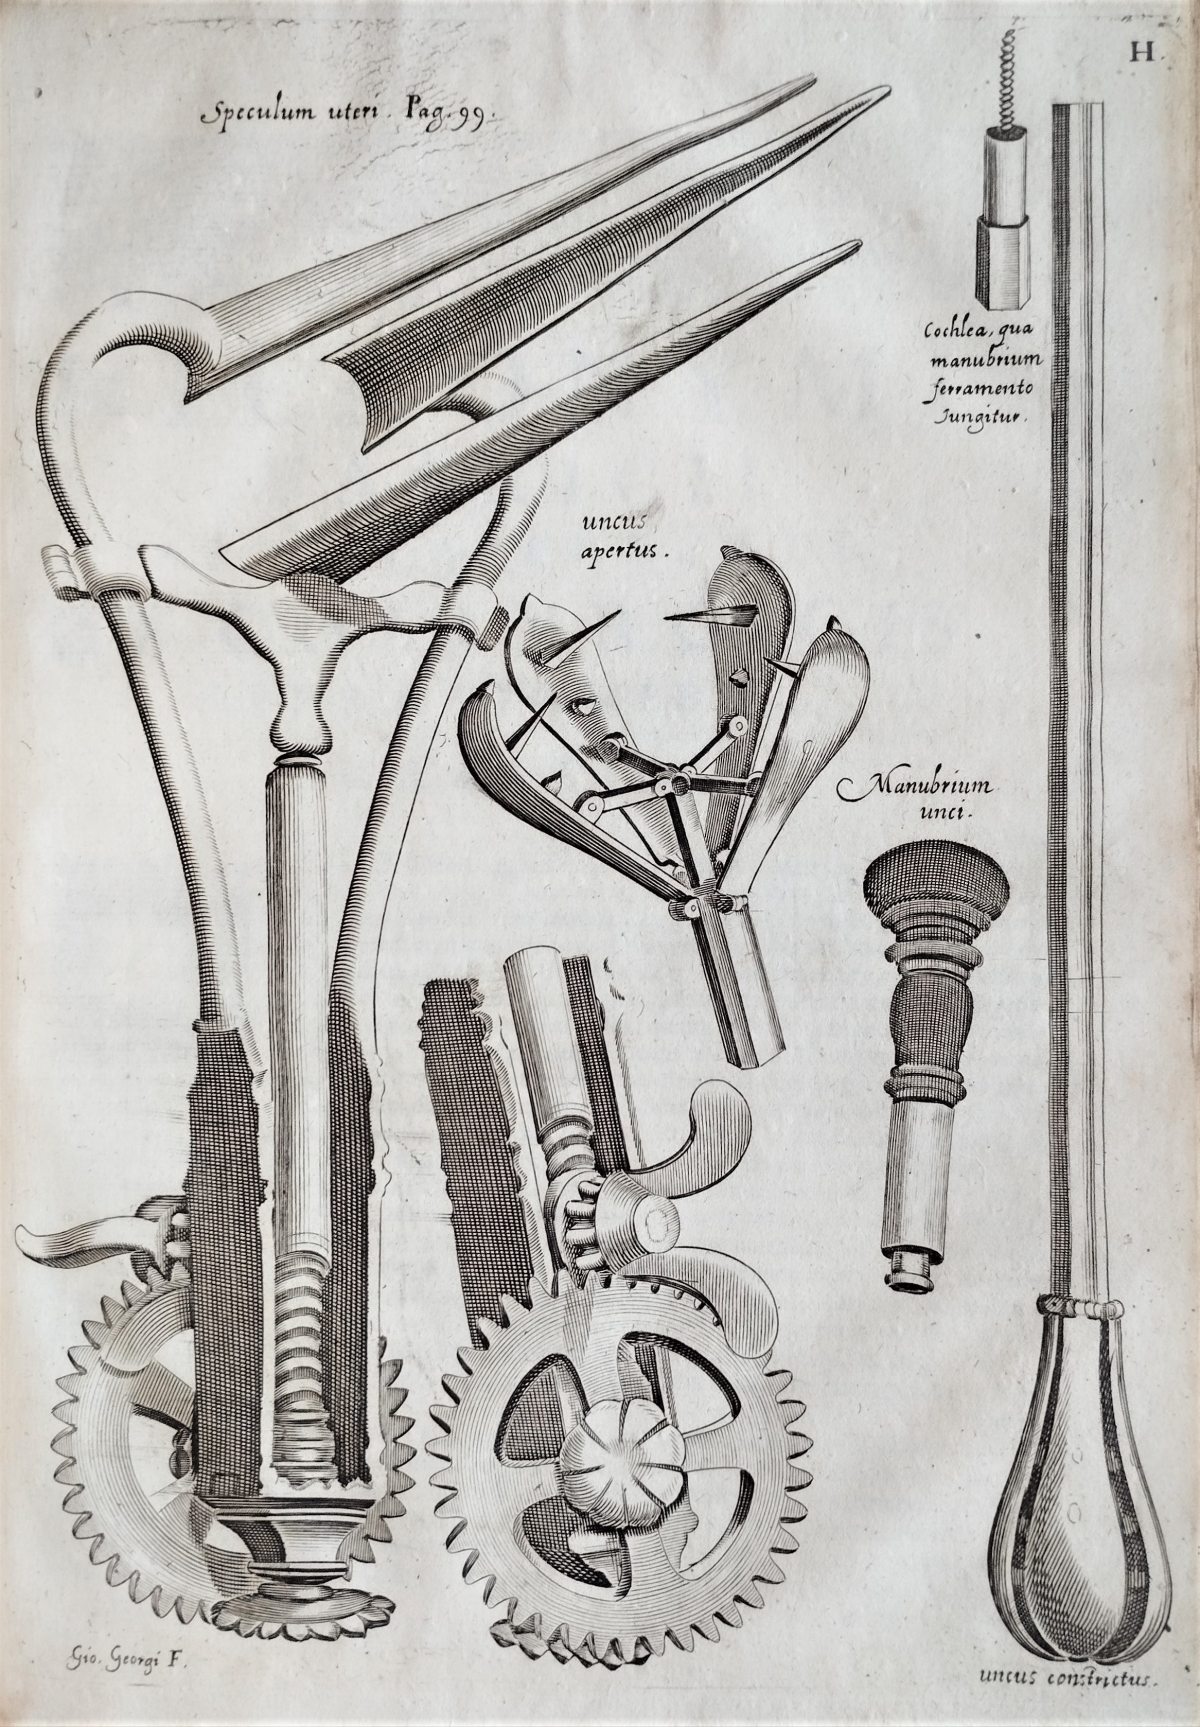 Engravings of various surgical tools and objects related to the cure of the human body. 